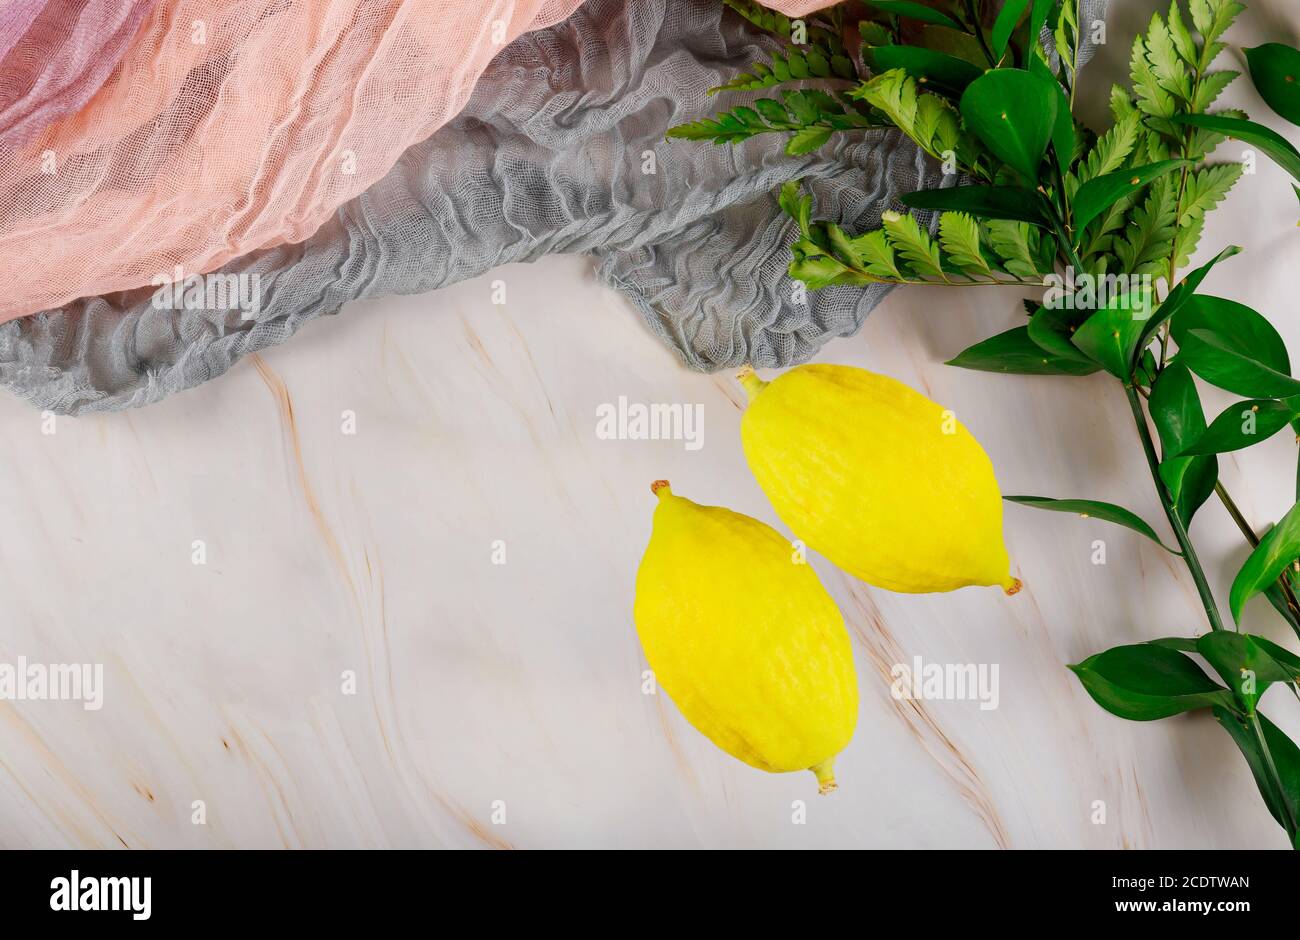 Religious Jews choose etrog fruit traditional of ritual plants on the eve of Sukkot. Stock Photo